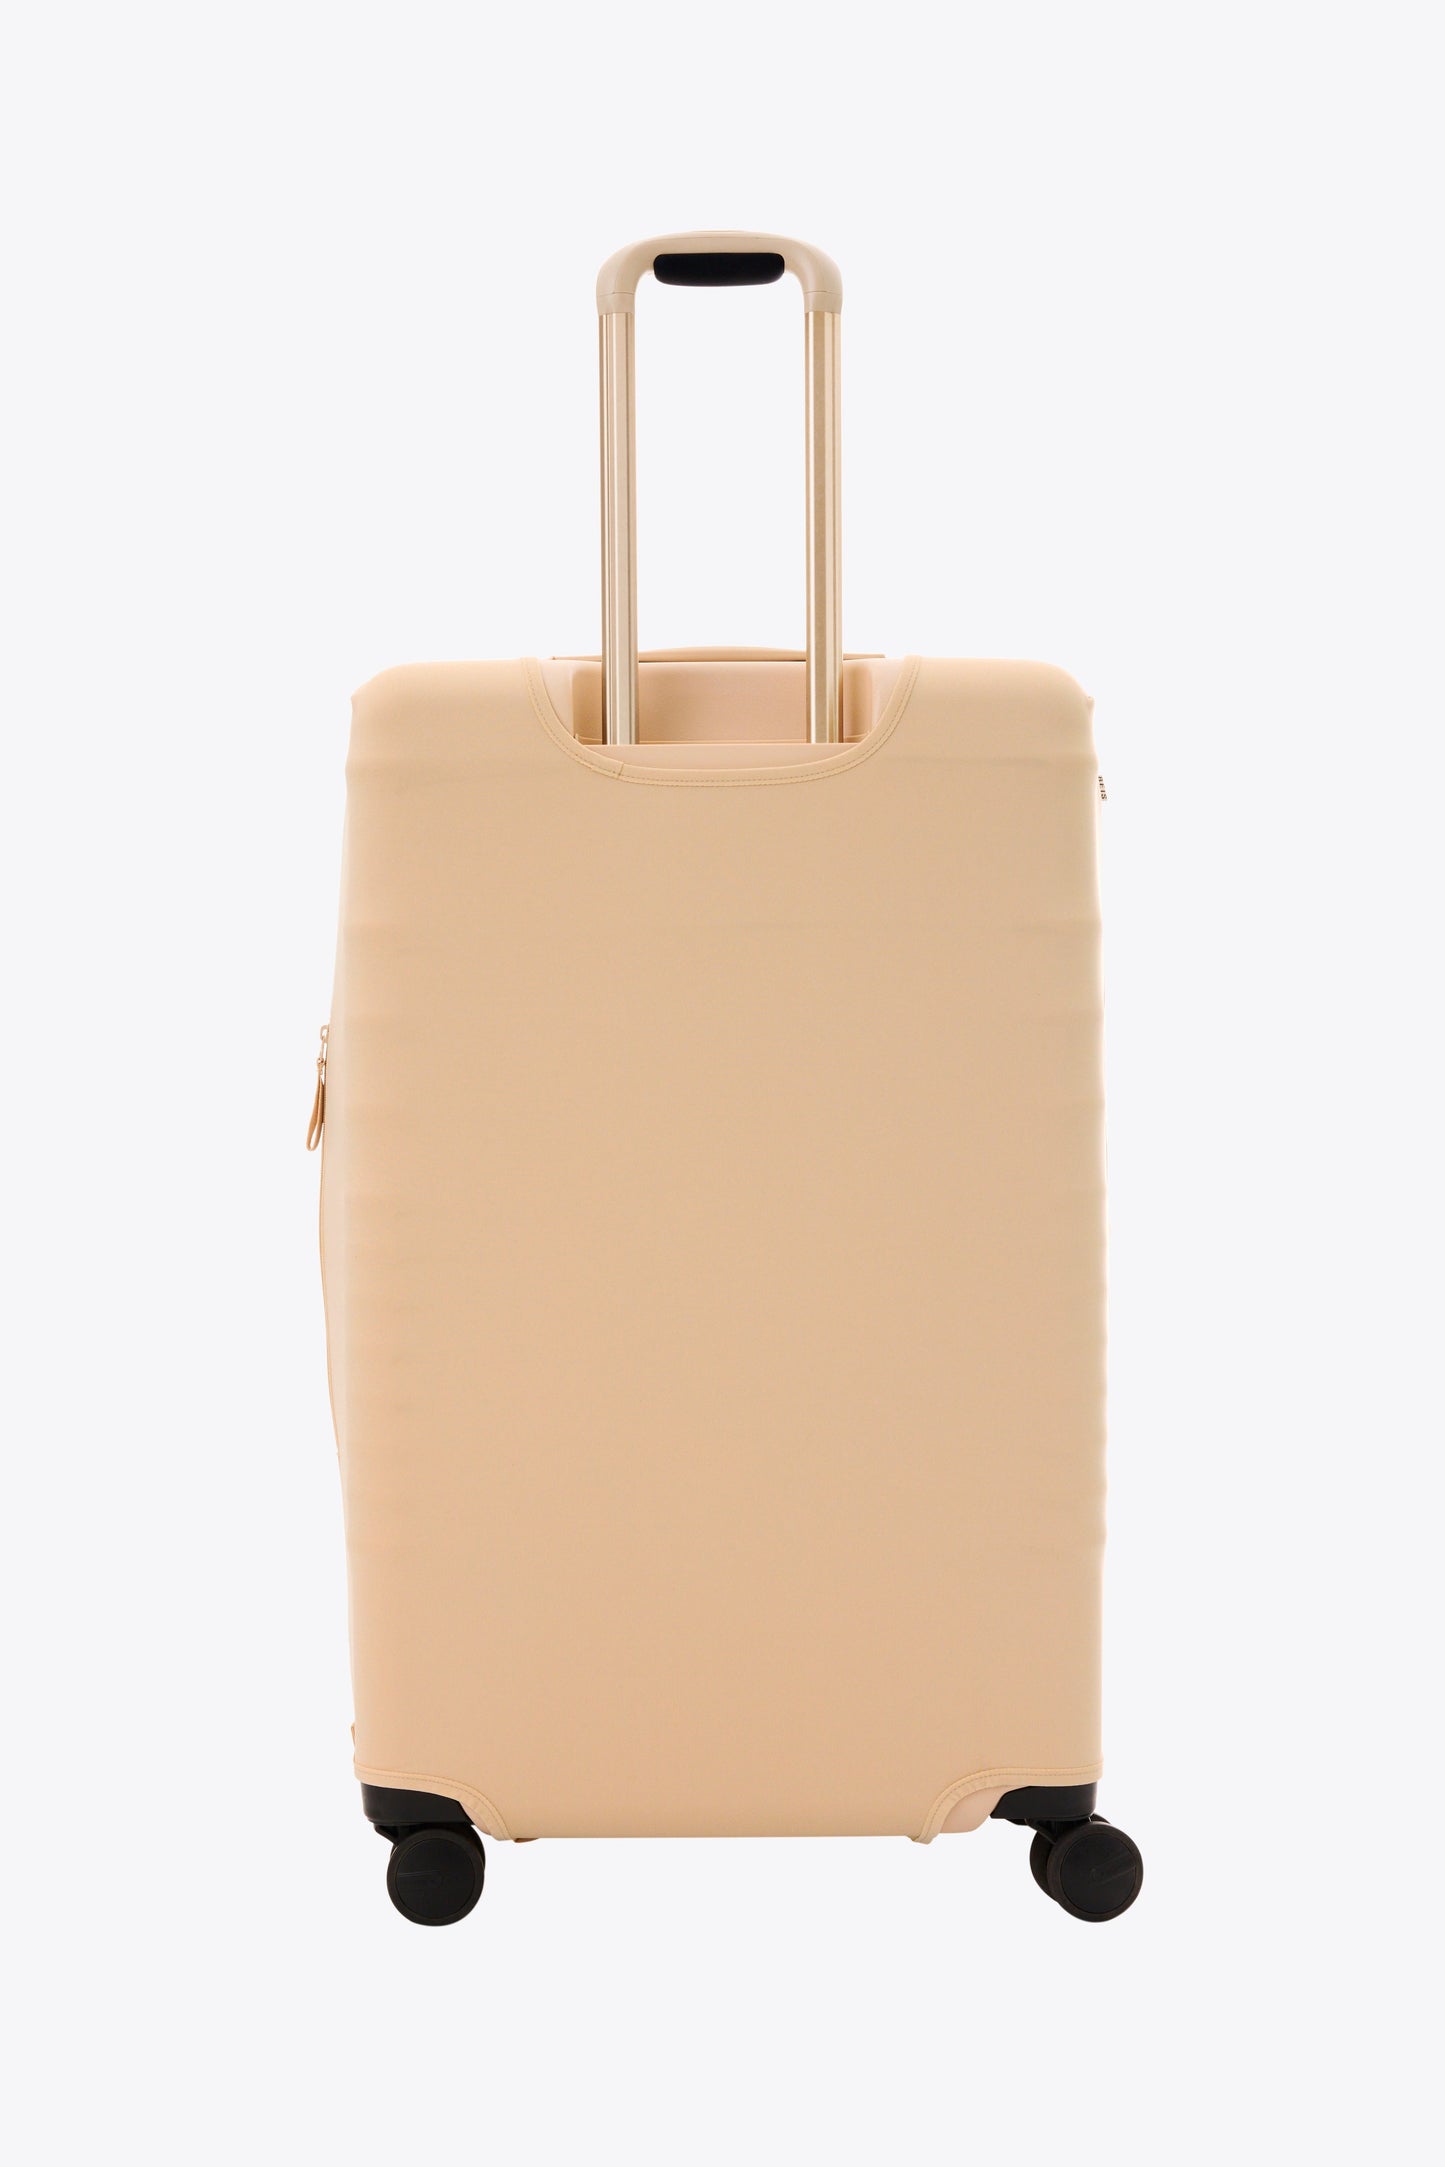 The Large Check-In Luggage Cover in Beige